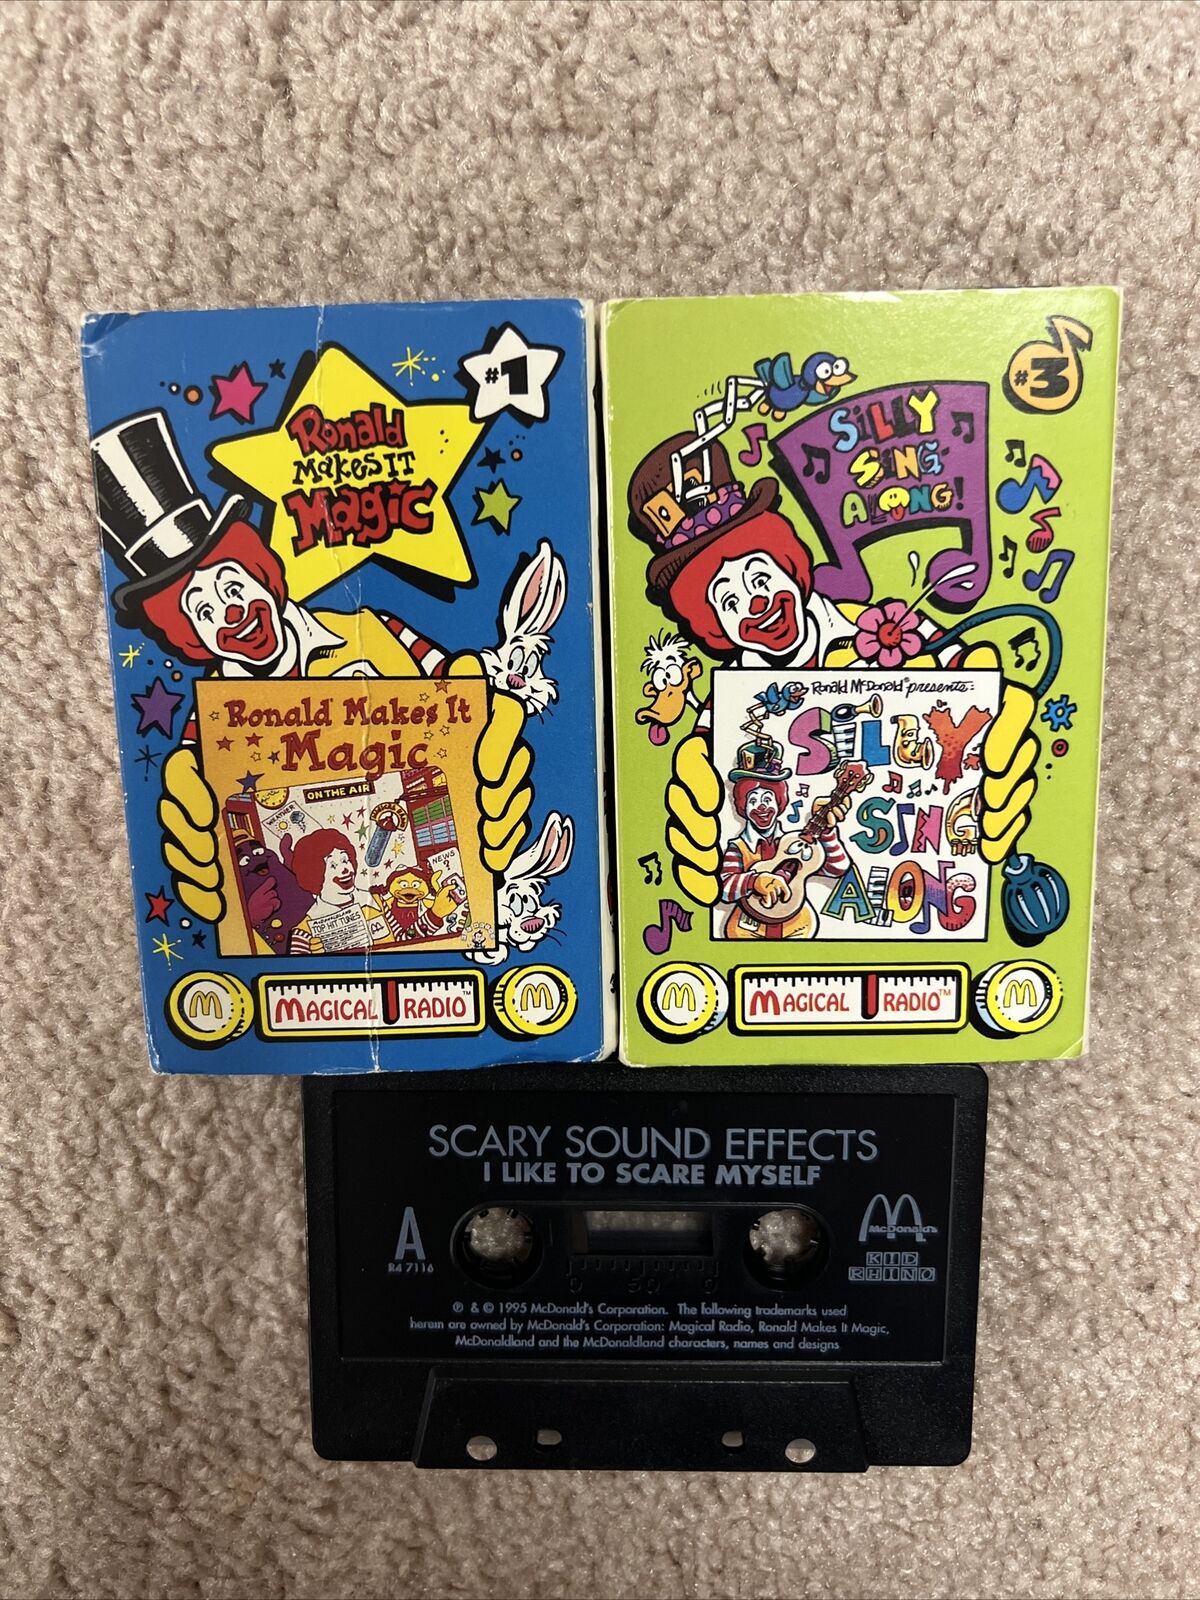 McDonald\'s Happy Meal Magical Radio Cassette Tapes Make Magic/Silly Song/Scary